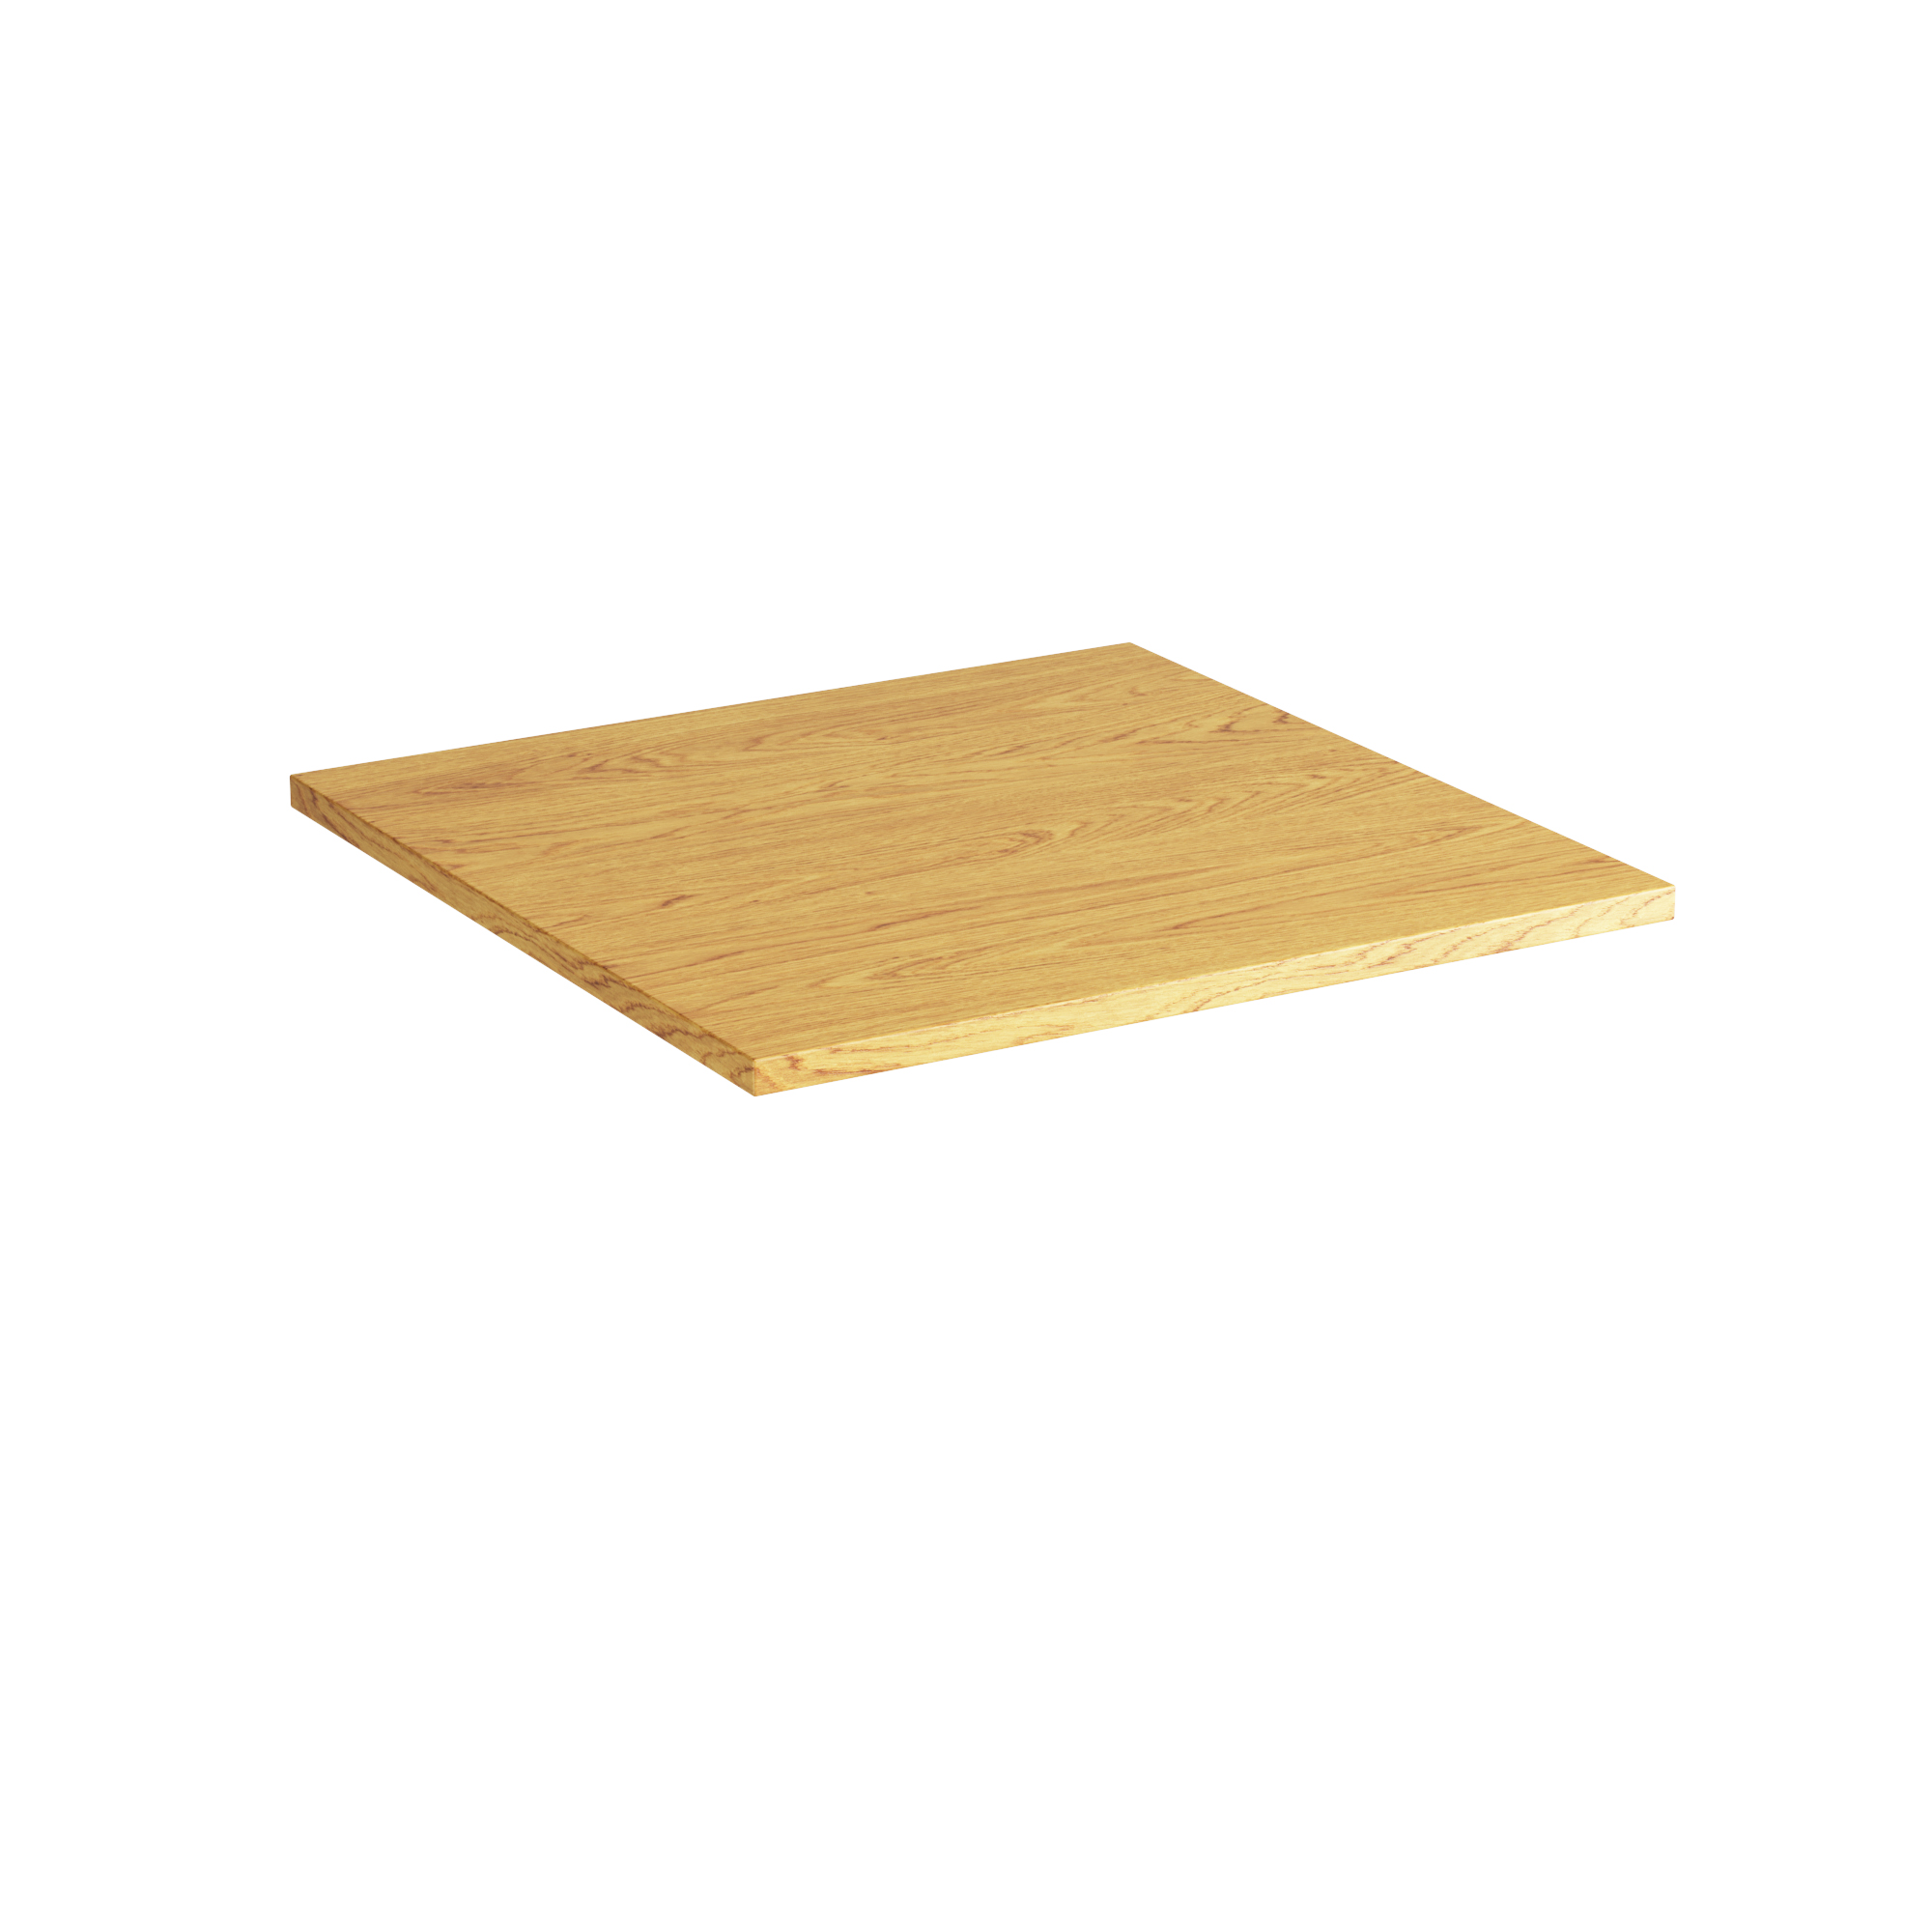 900 x 900mm Square Table Top